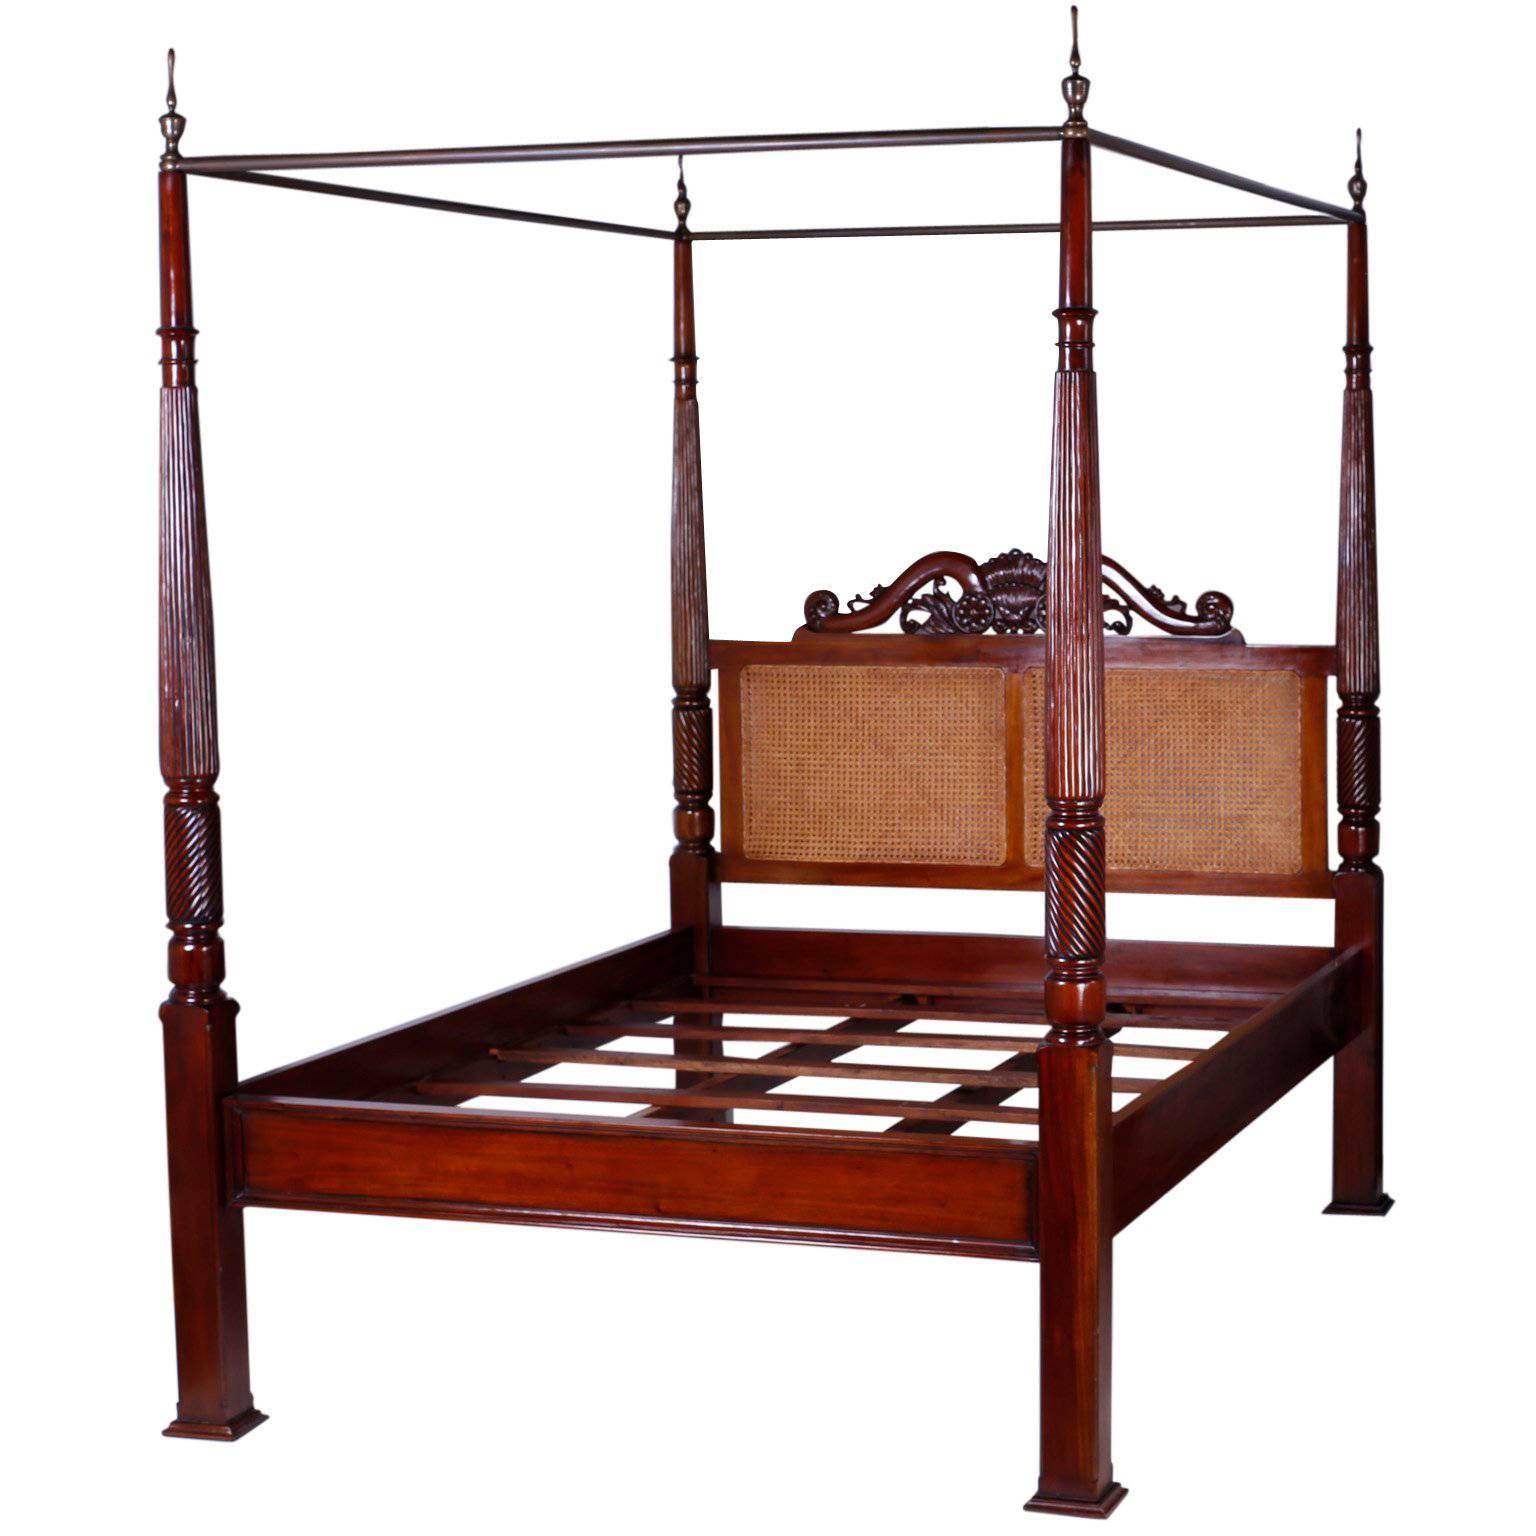 British Colonial West Indies Style Queen-Size Canopy Bed